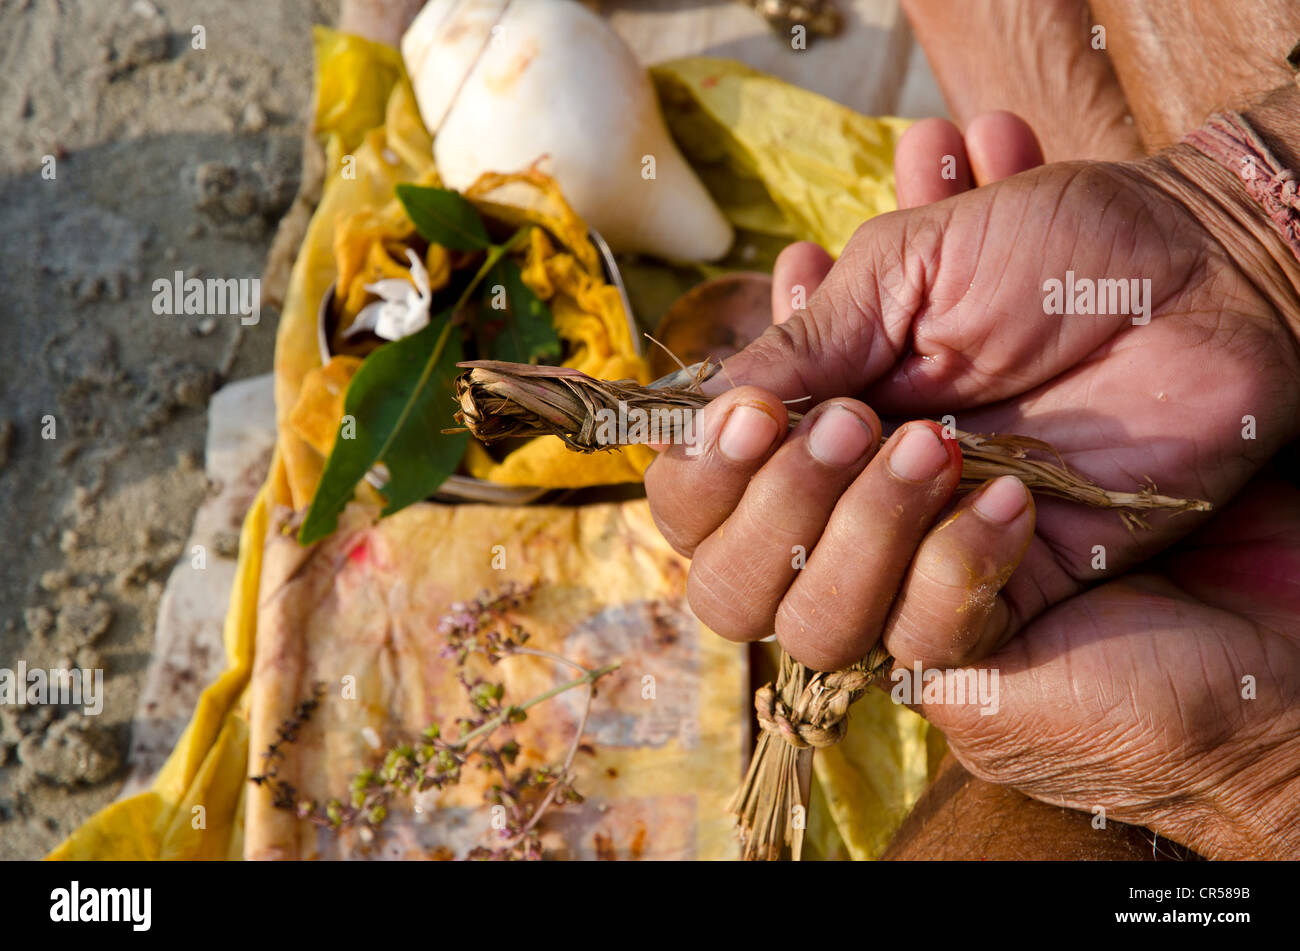 Religious ritual being performed at Sangam, the confluence of the holy rivers Ganges, Yamuna and Saraswati, in , India, Asia Stock Photo